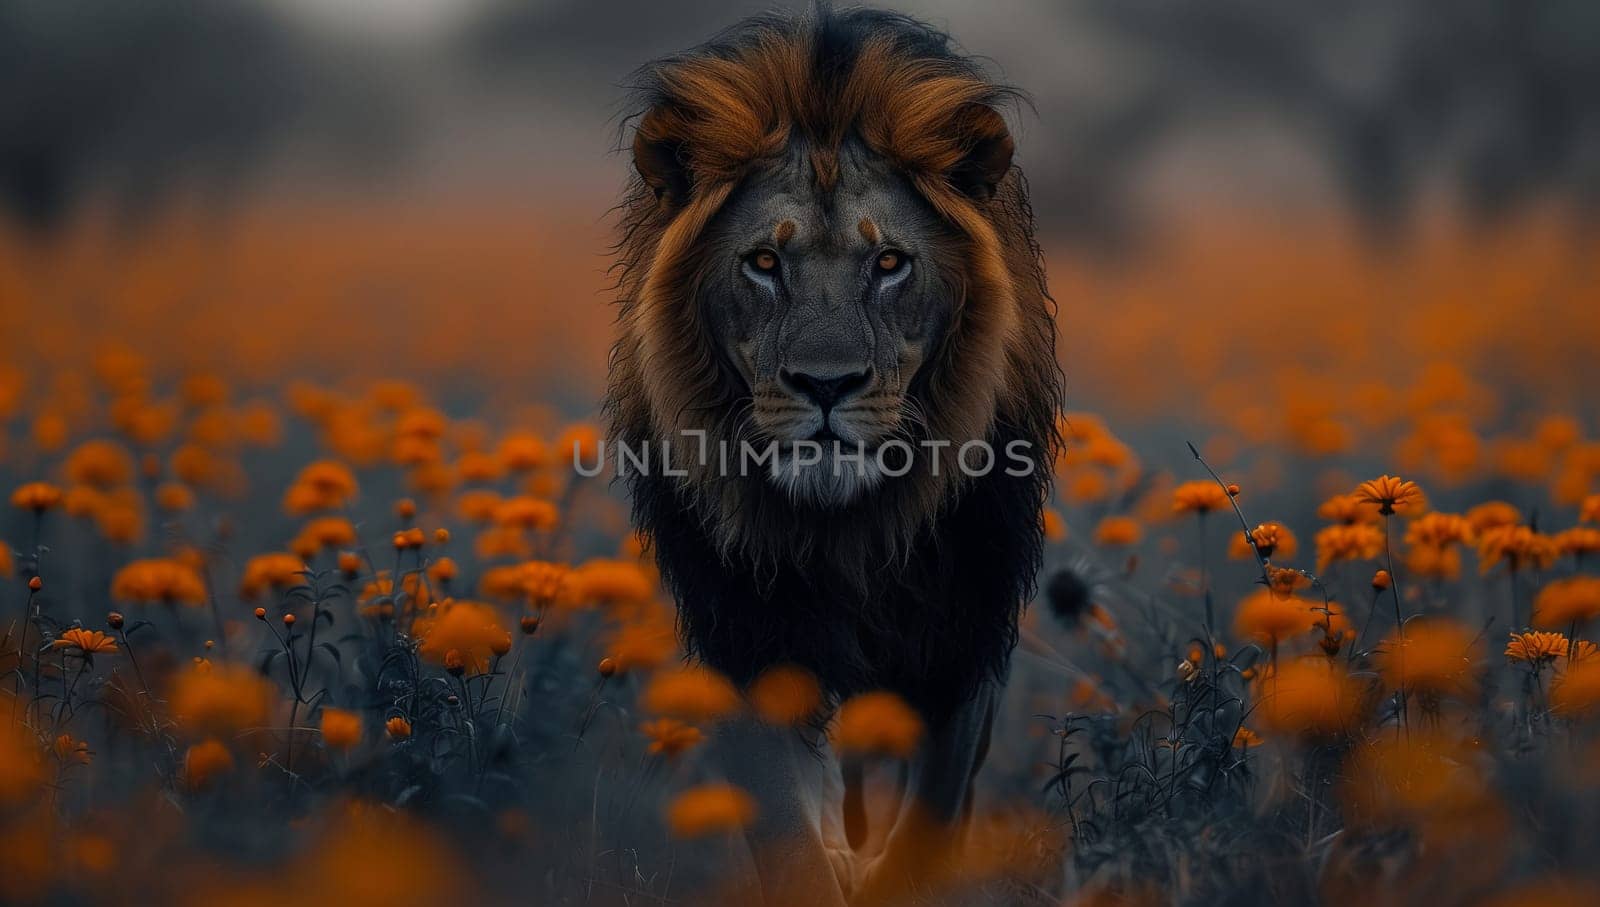 A Masai lion, a member of the Felidae family, is strolling through a natural landscape filled with orange flowers. This majestic big cat contrasts beautifully with the colorful plants and grass